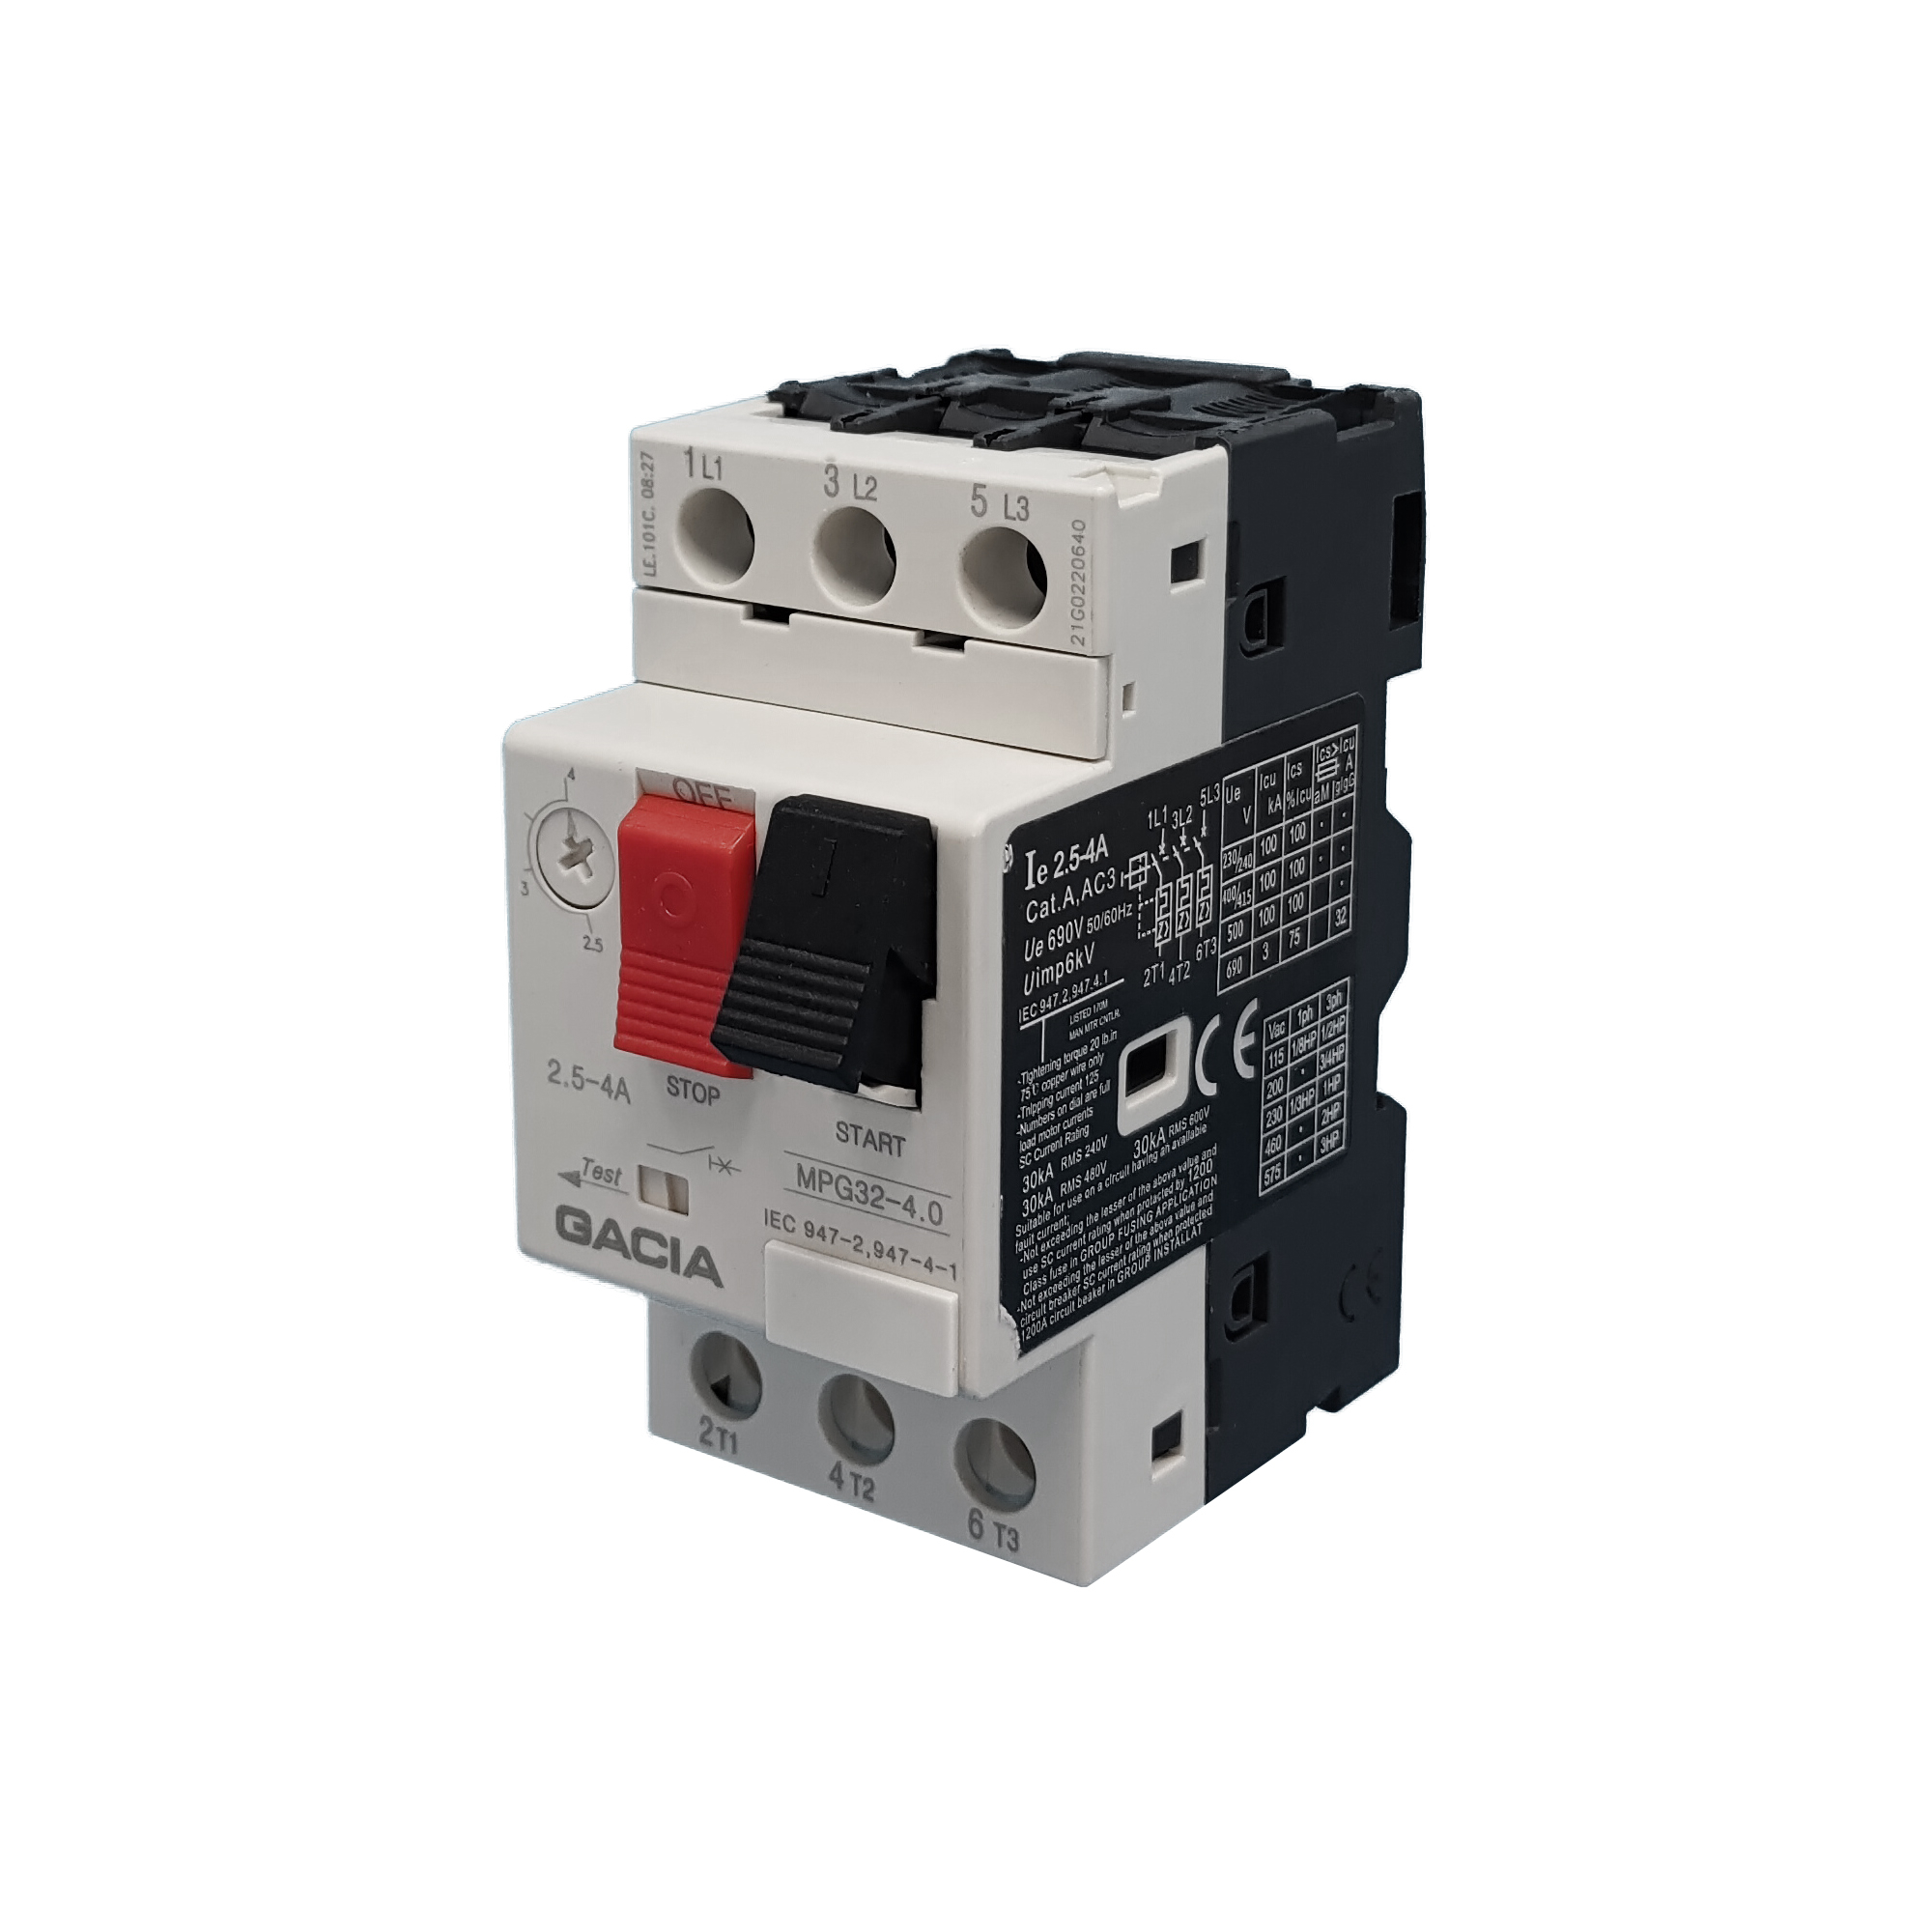 MPG32 17-23A motor protection circuit breaker